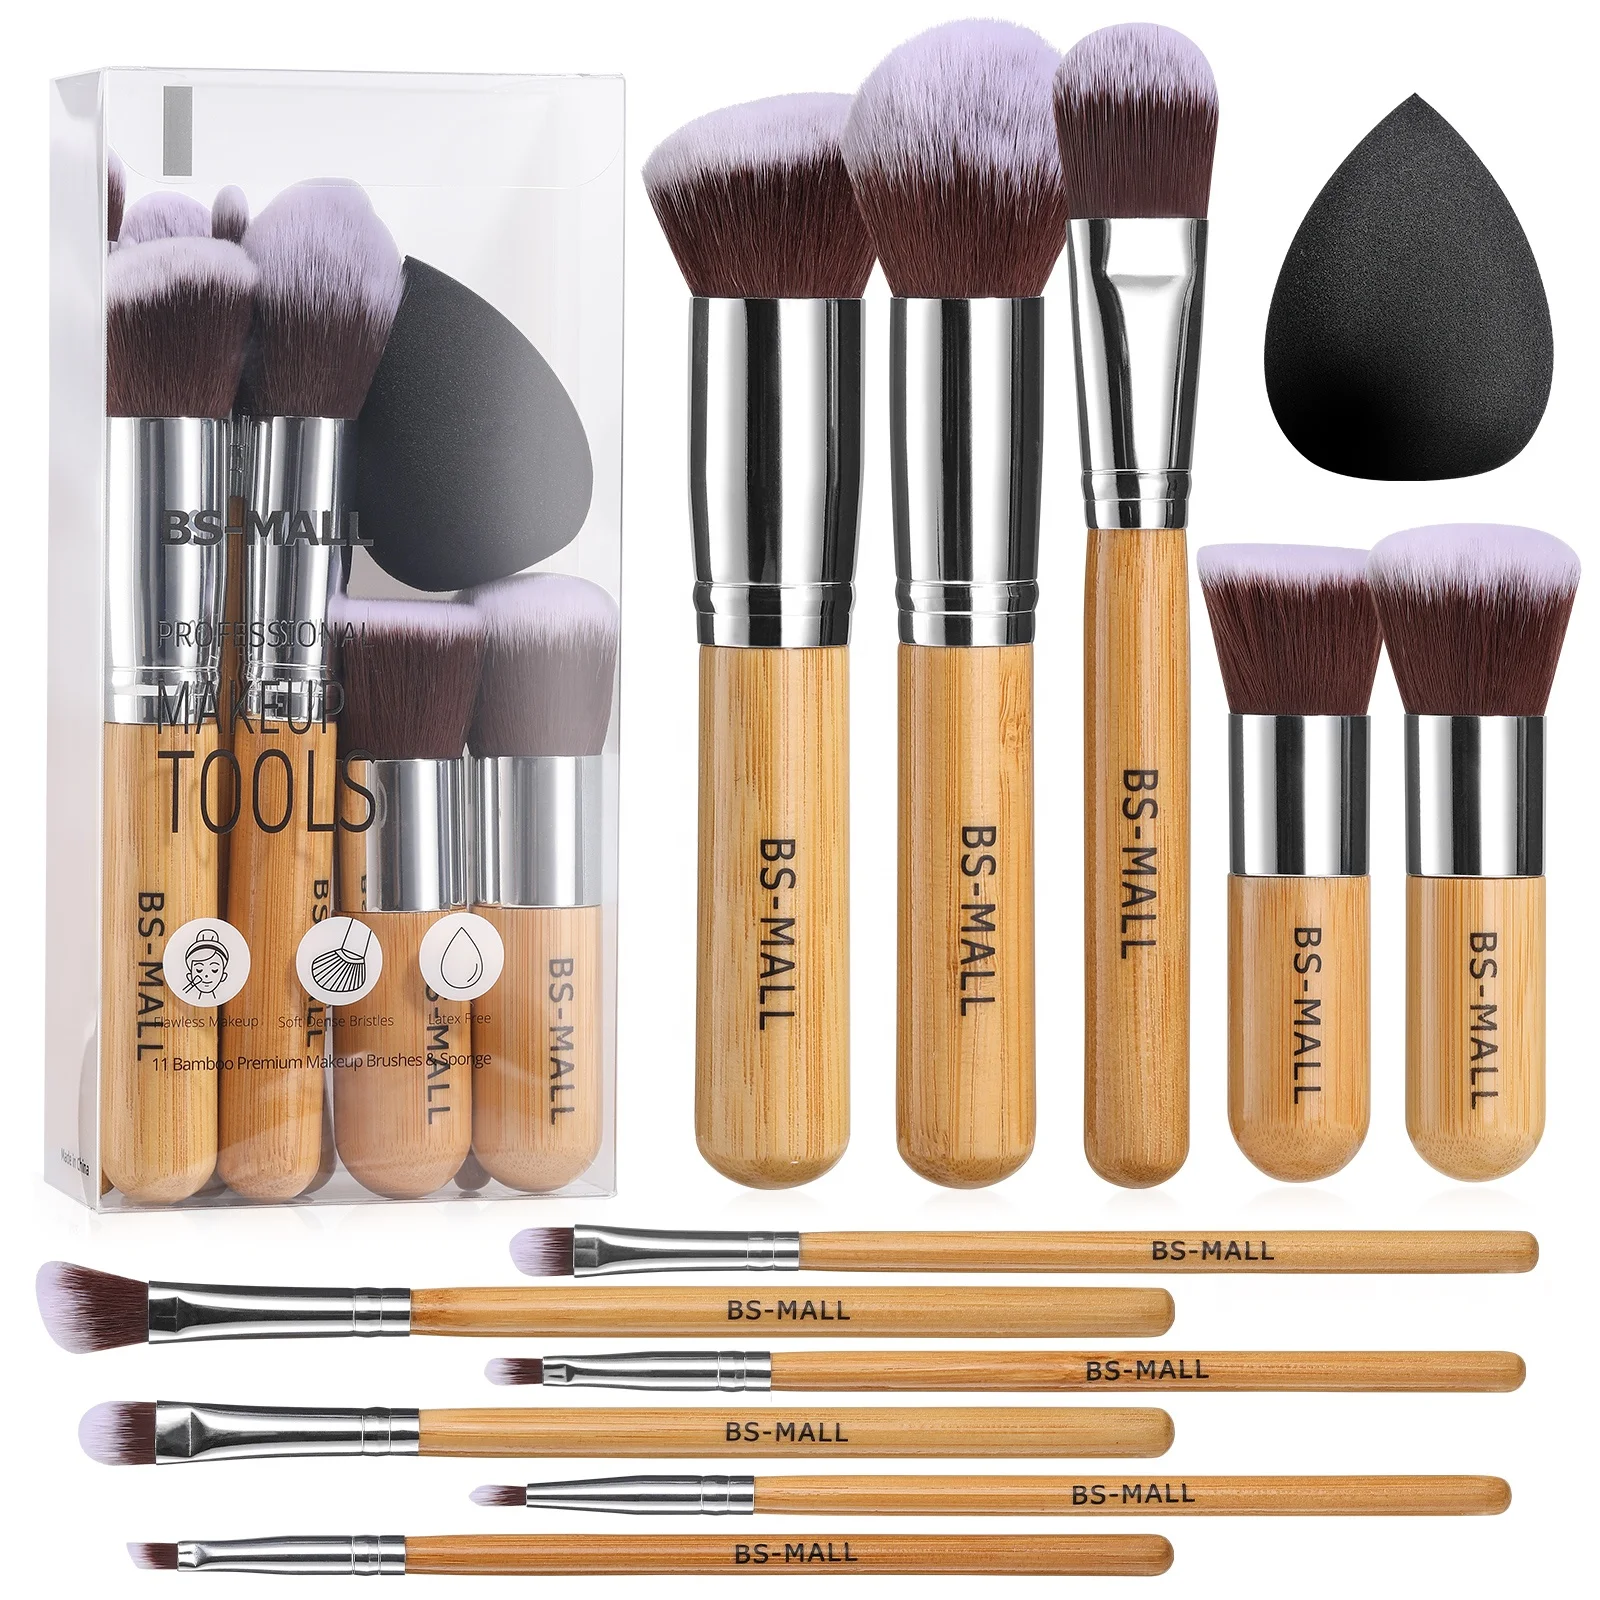 

BS-MALL 11PCS Vegan Bamboo Brushes Makeup Private Label Eco-Friendly Synthetic Face Cosmetic Make up Brushes Makeup Sponge Set